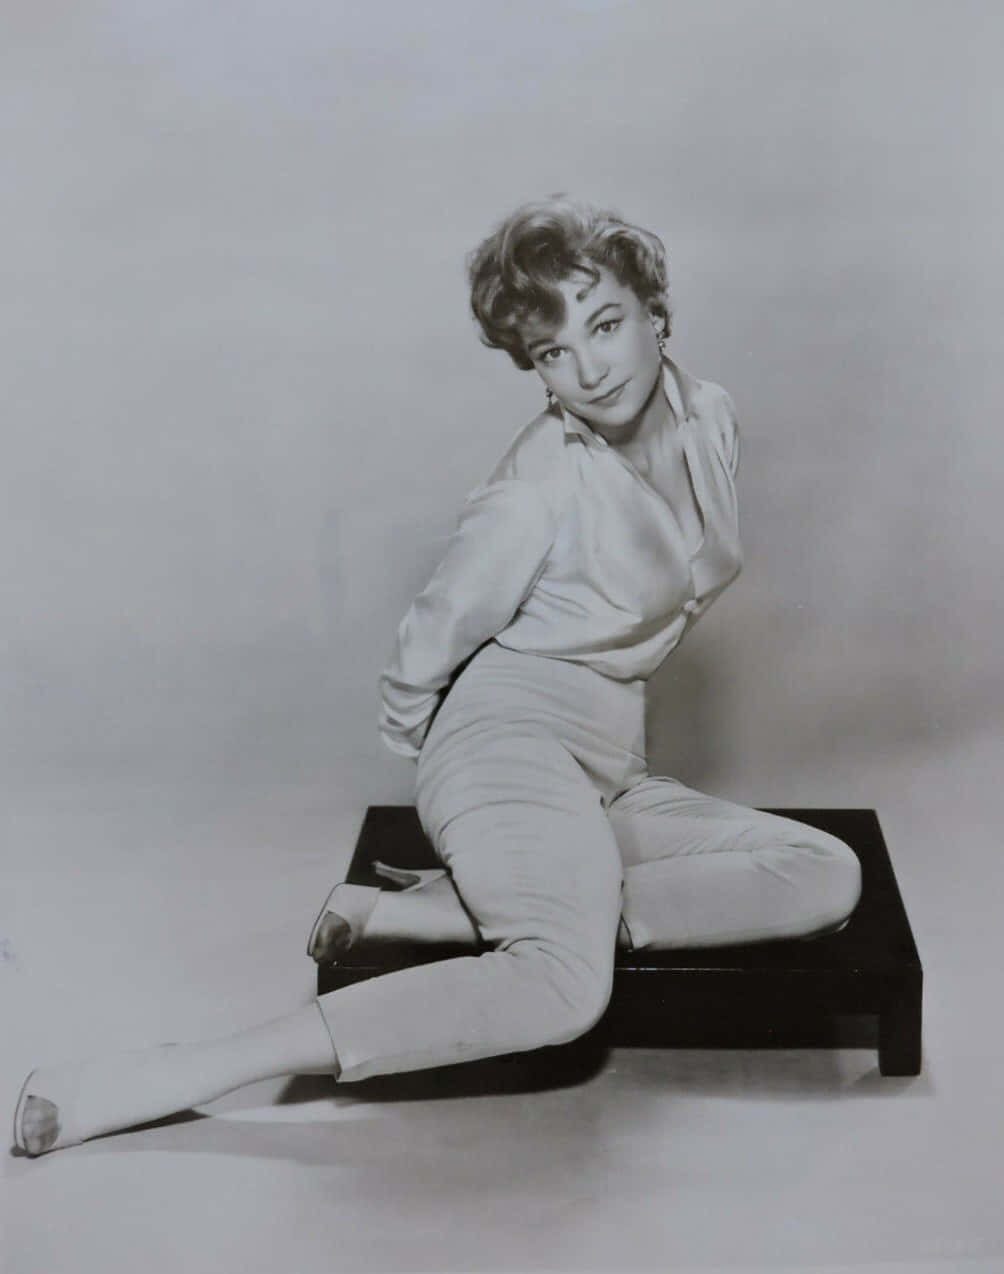 Shirley MacLaine Young Actress Photo Wallpaper